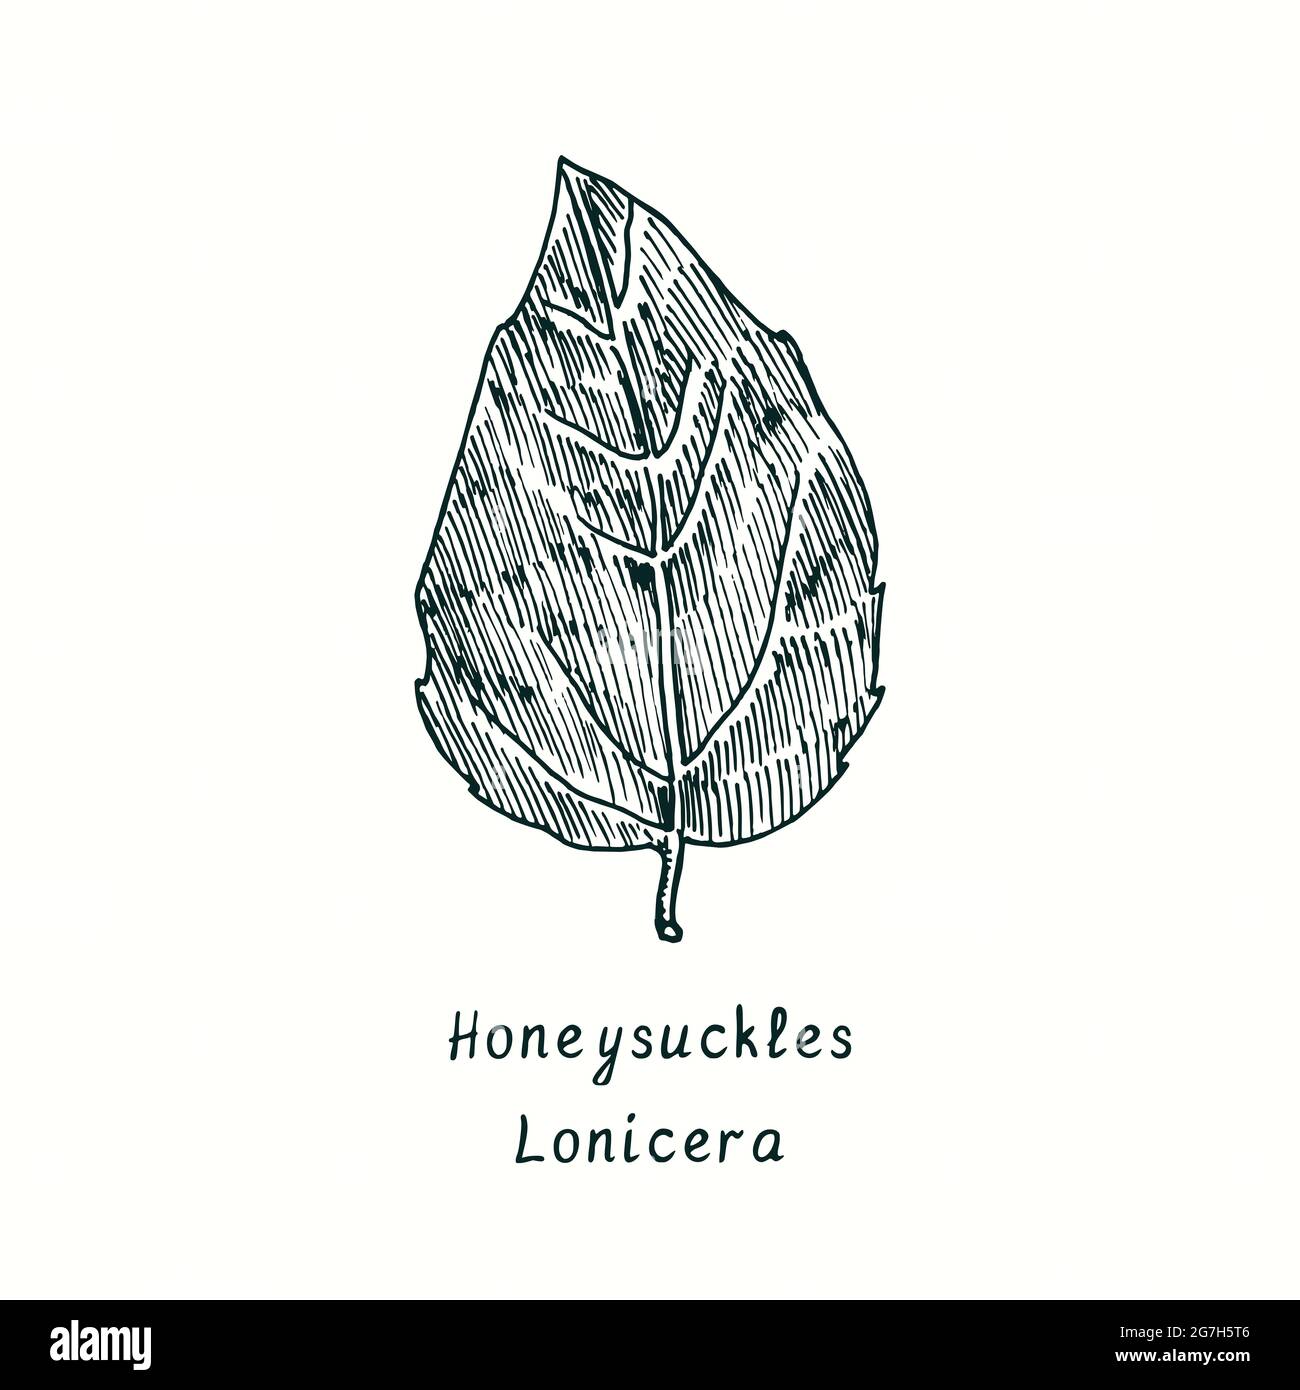 Honeysuckles (Lonicera) leaf. Ink black and white doodle drawing in woodcut style. Stock Photo